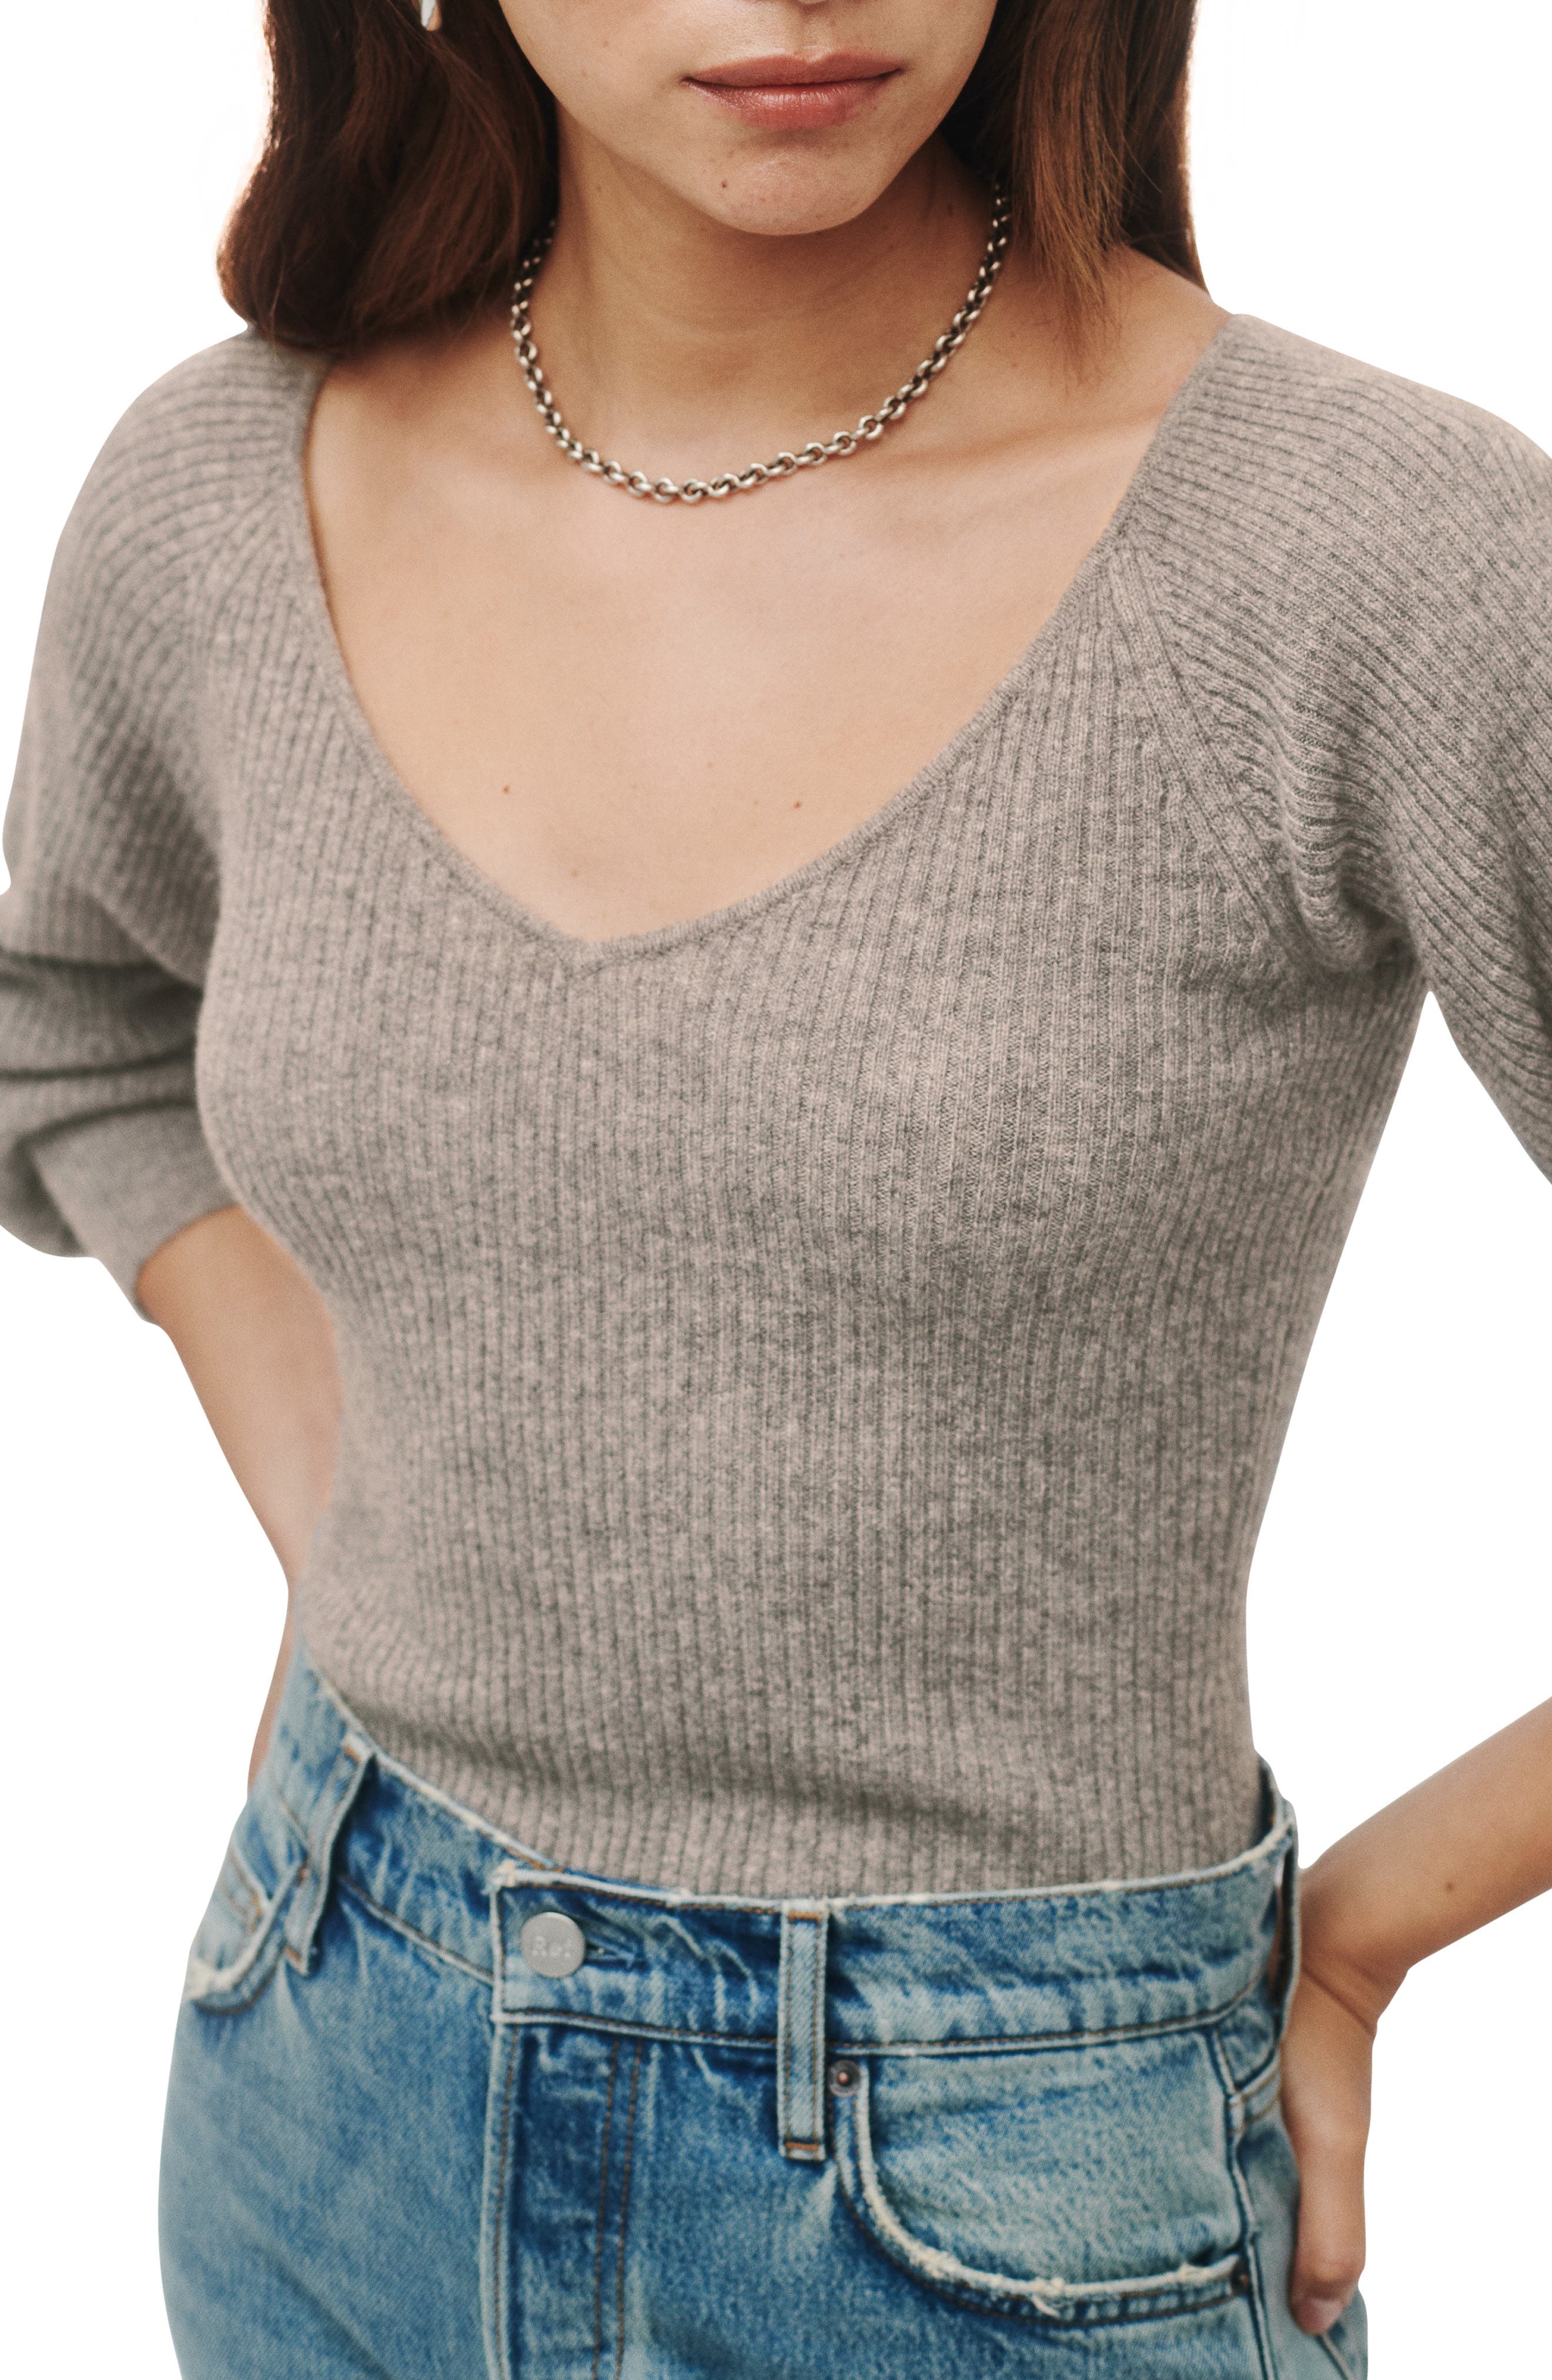 Lucky Shop New Casual Cashmere Sweater Women high Collar Long Sleeve Knitted Sweater Women Sweaters